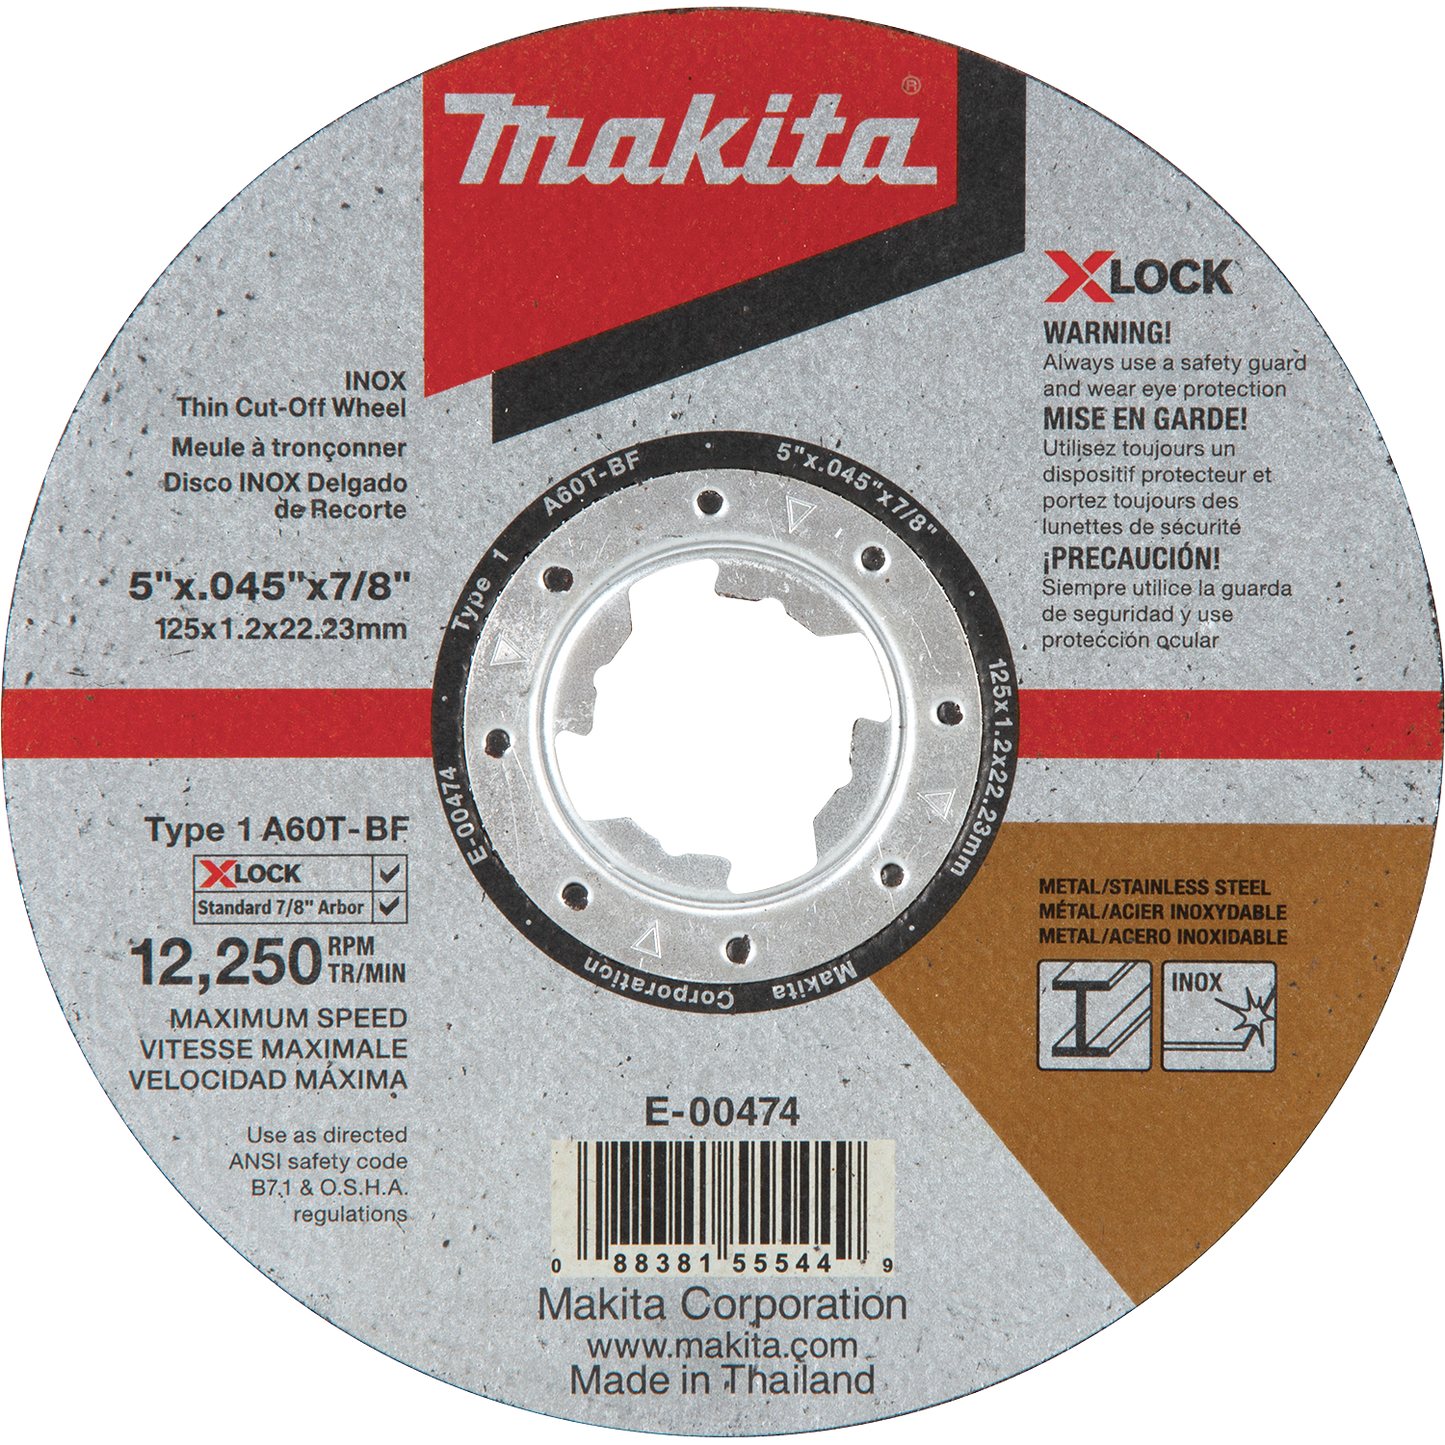 Makita E-00474 X‑LOCK 5" x .045" x 7/8" Type 1 General Purpose 60 Grit Thin Cut‑Off Wheel for Metal and Stainless Steel Cutting